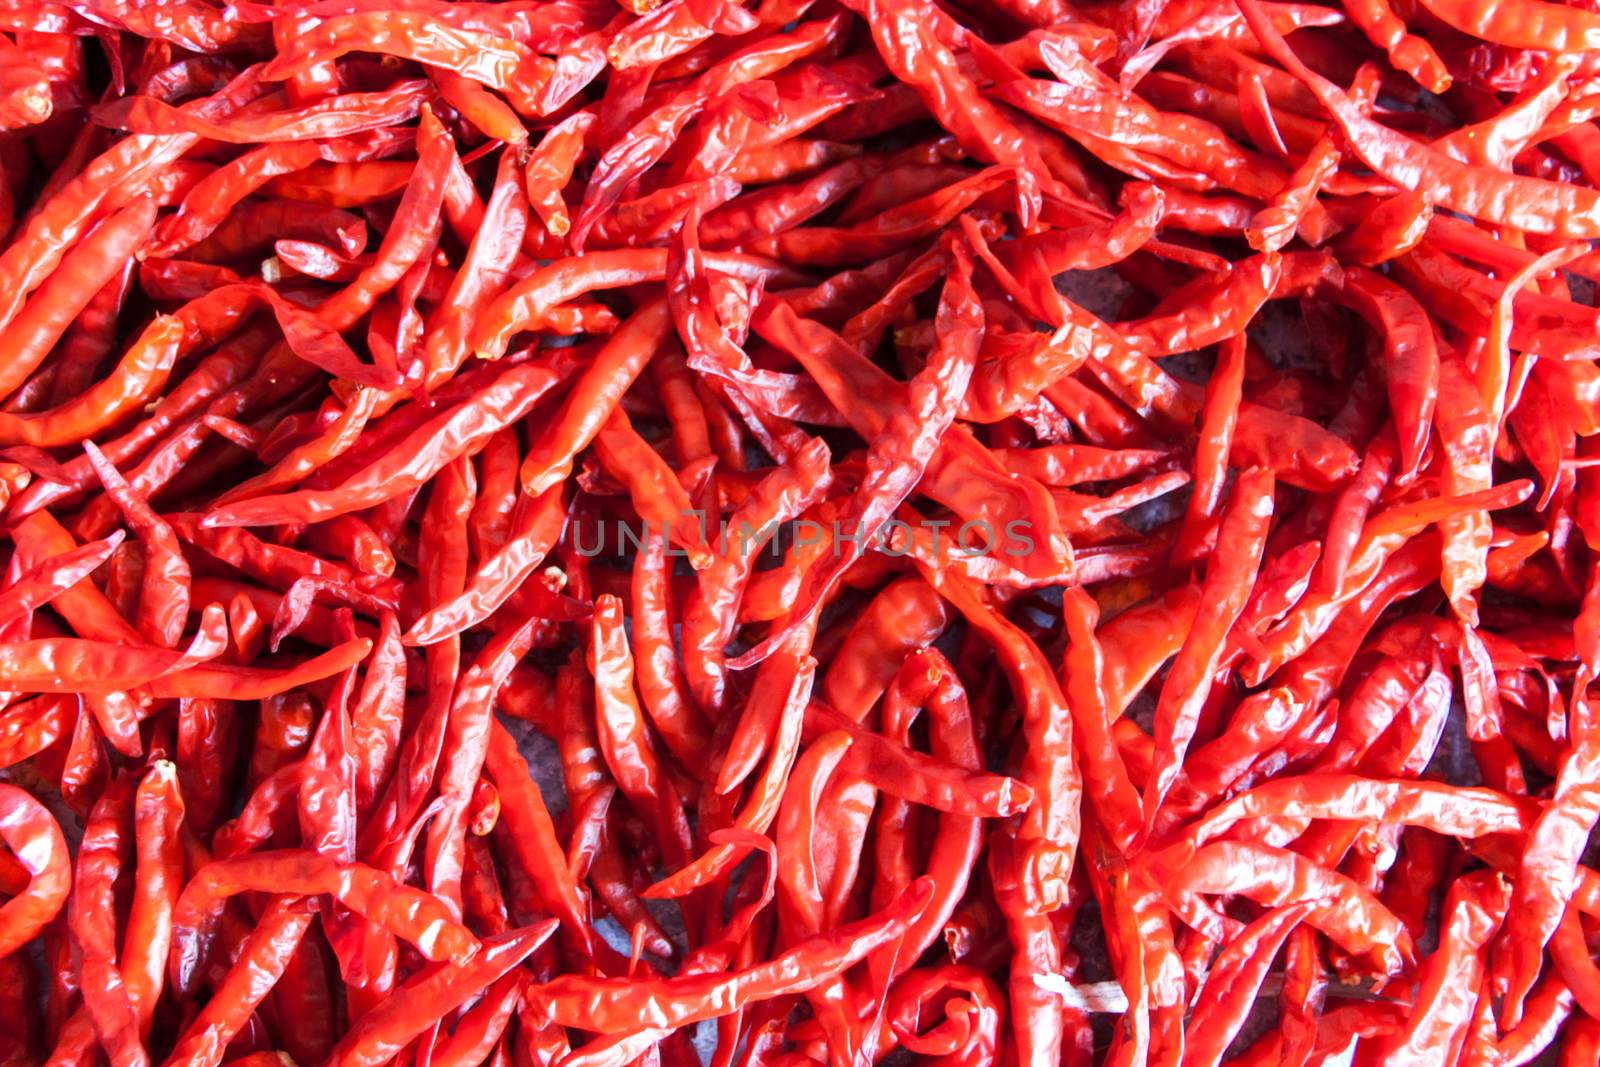 Dried red chili pepper spice with the sun. The food to be stored longer.